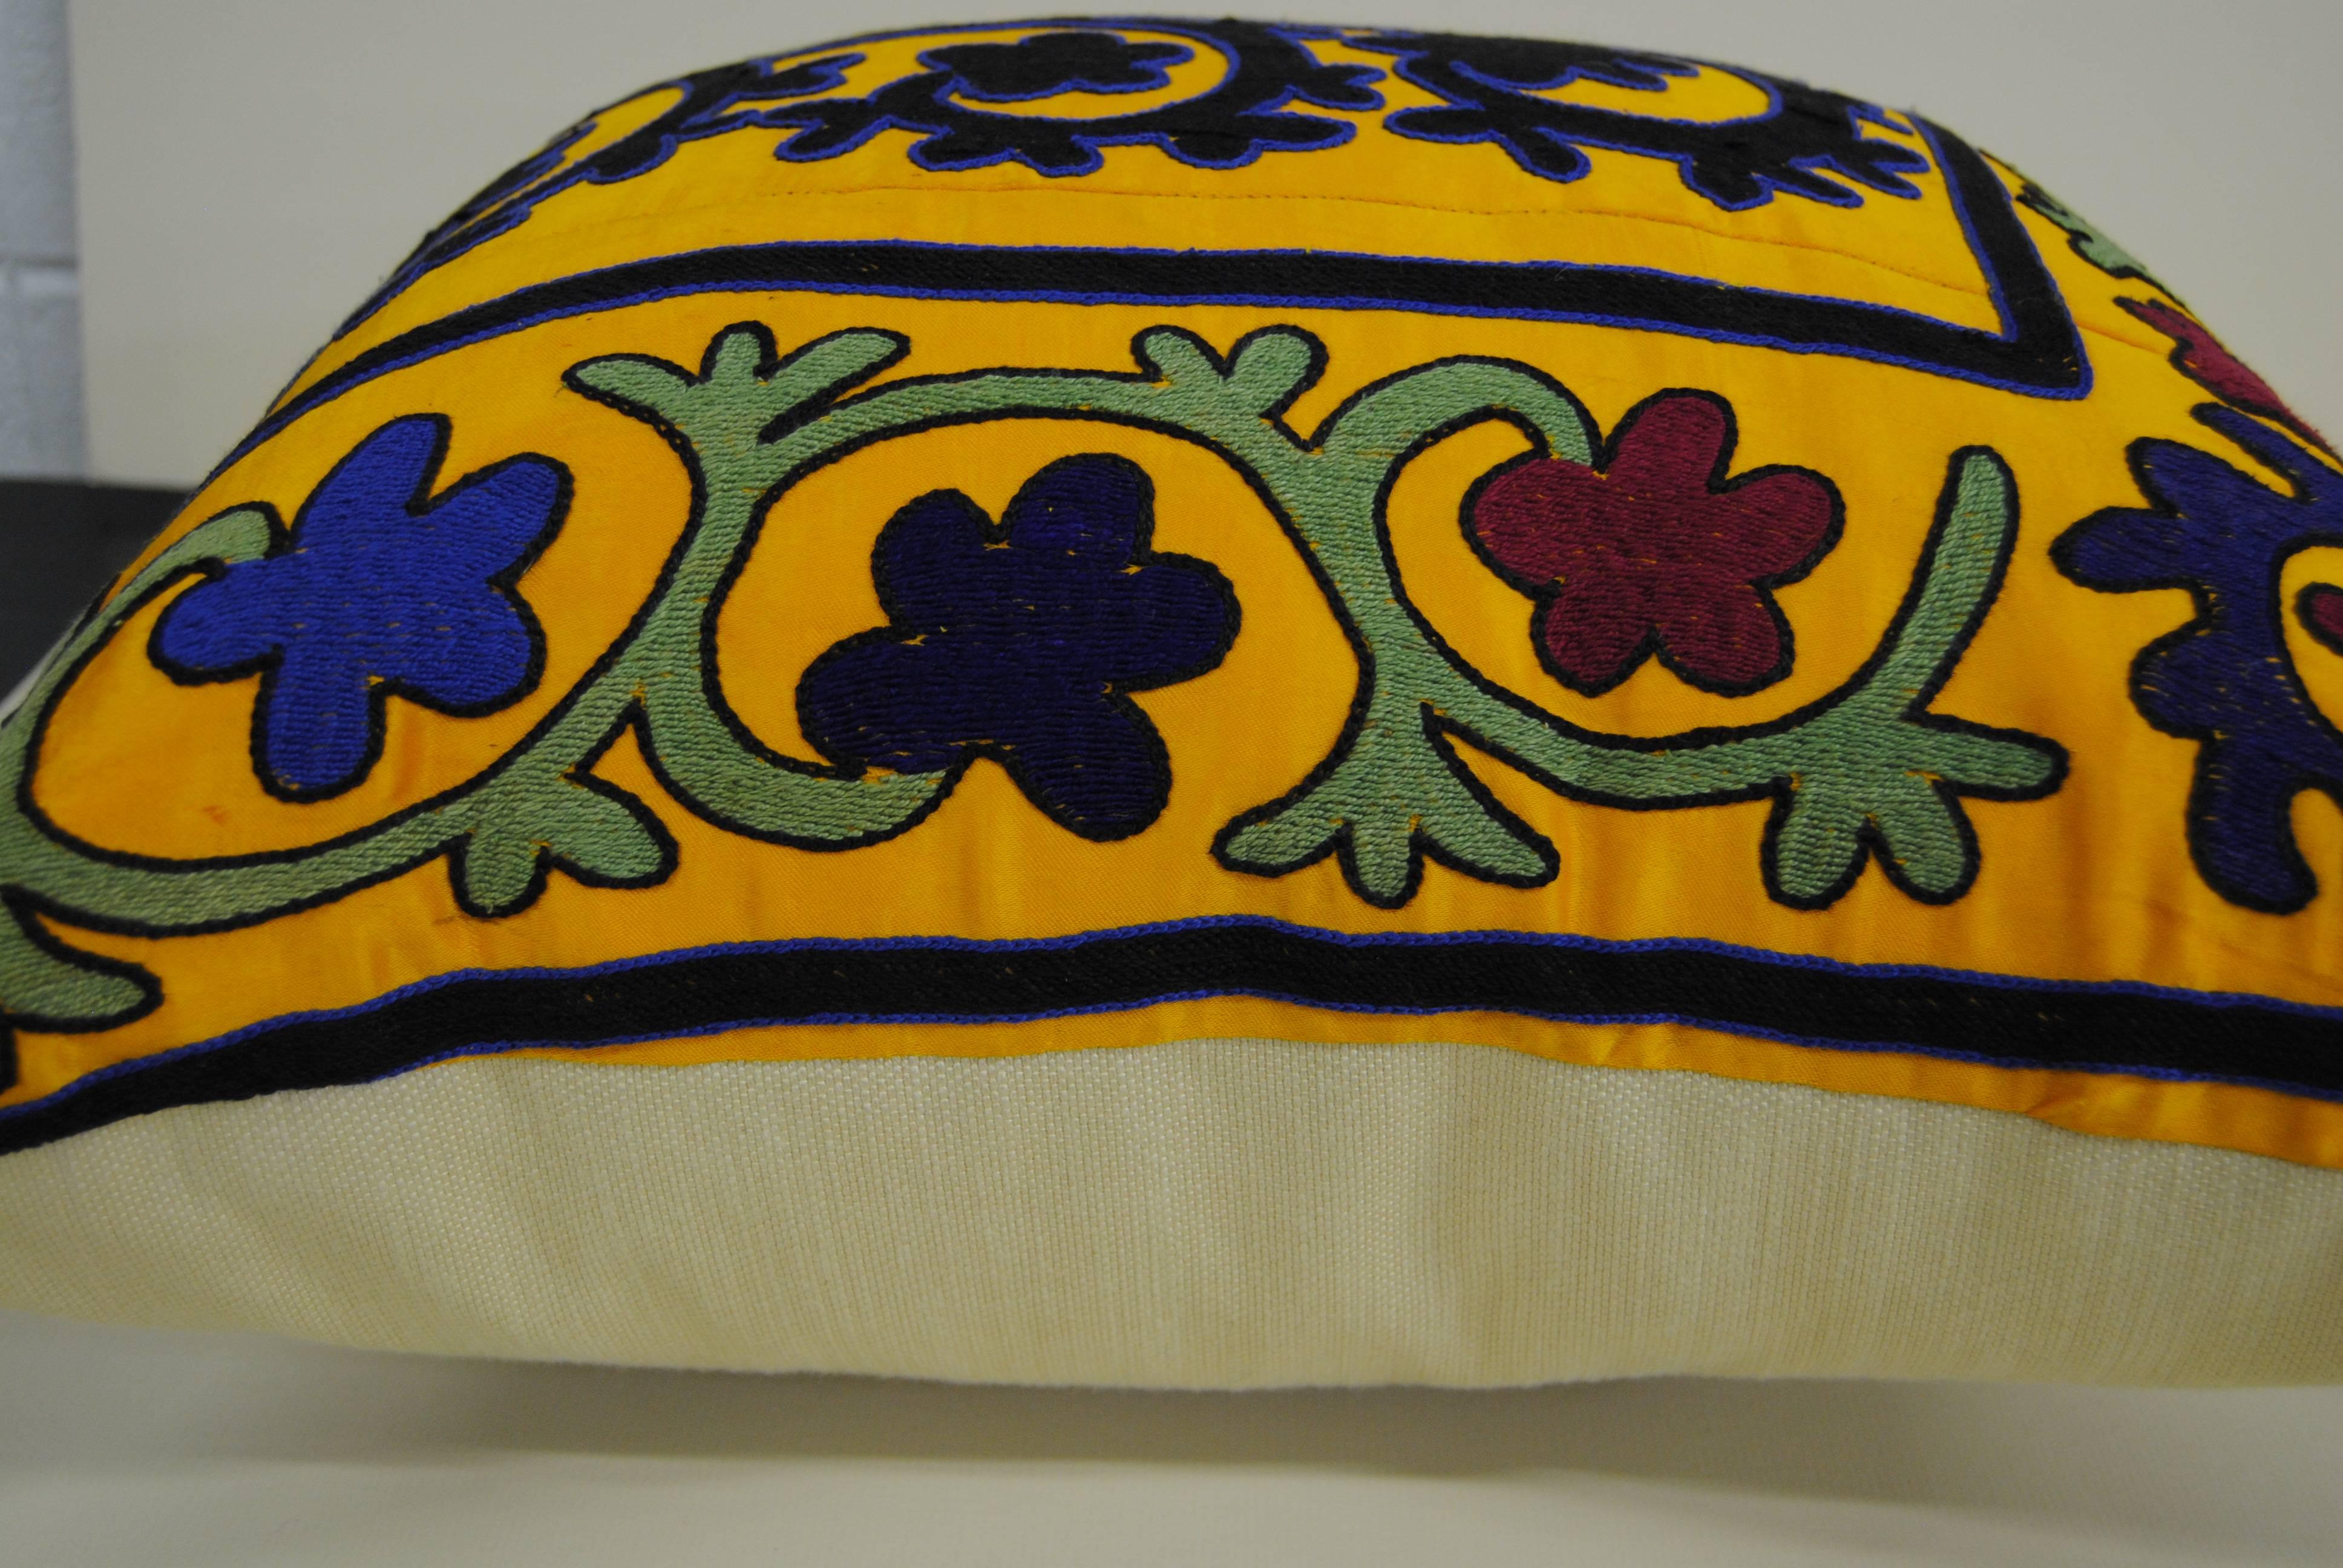 Hand Embroidered Silk or Cotton Uzbekistan Textile Pillow In Excellent Condition For Sale In Glen Ellyn, IL